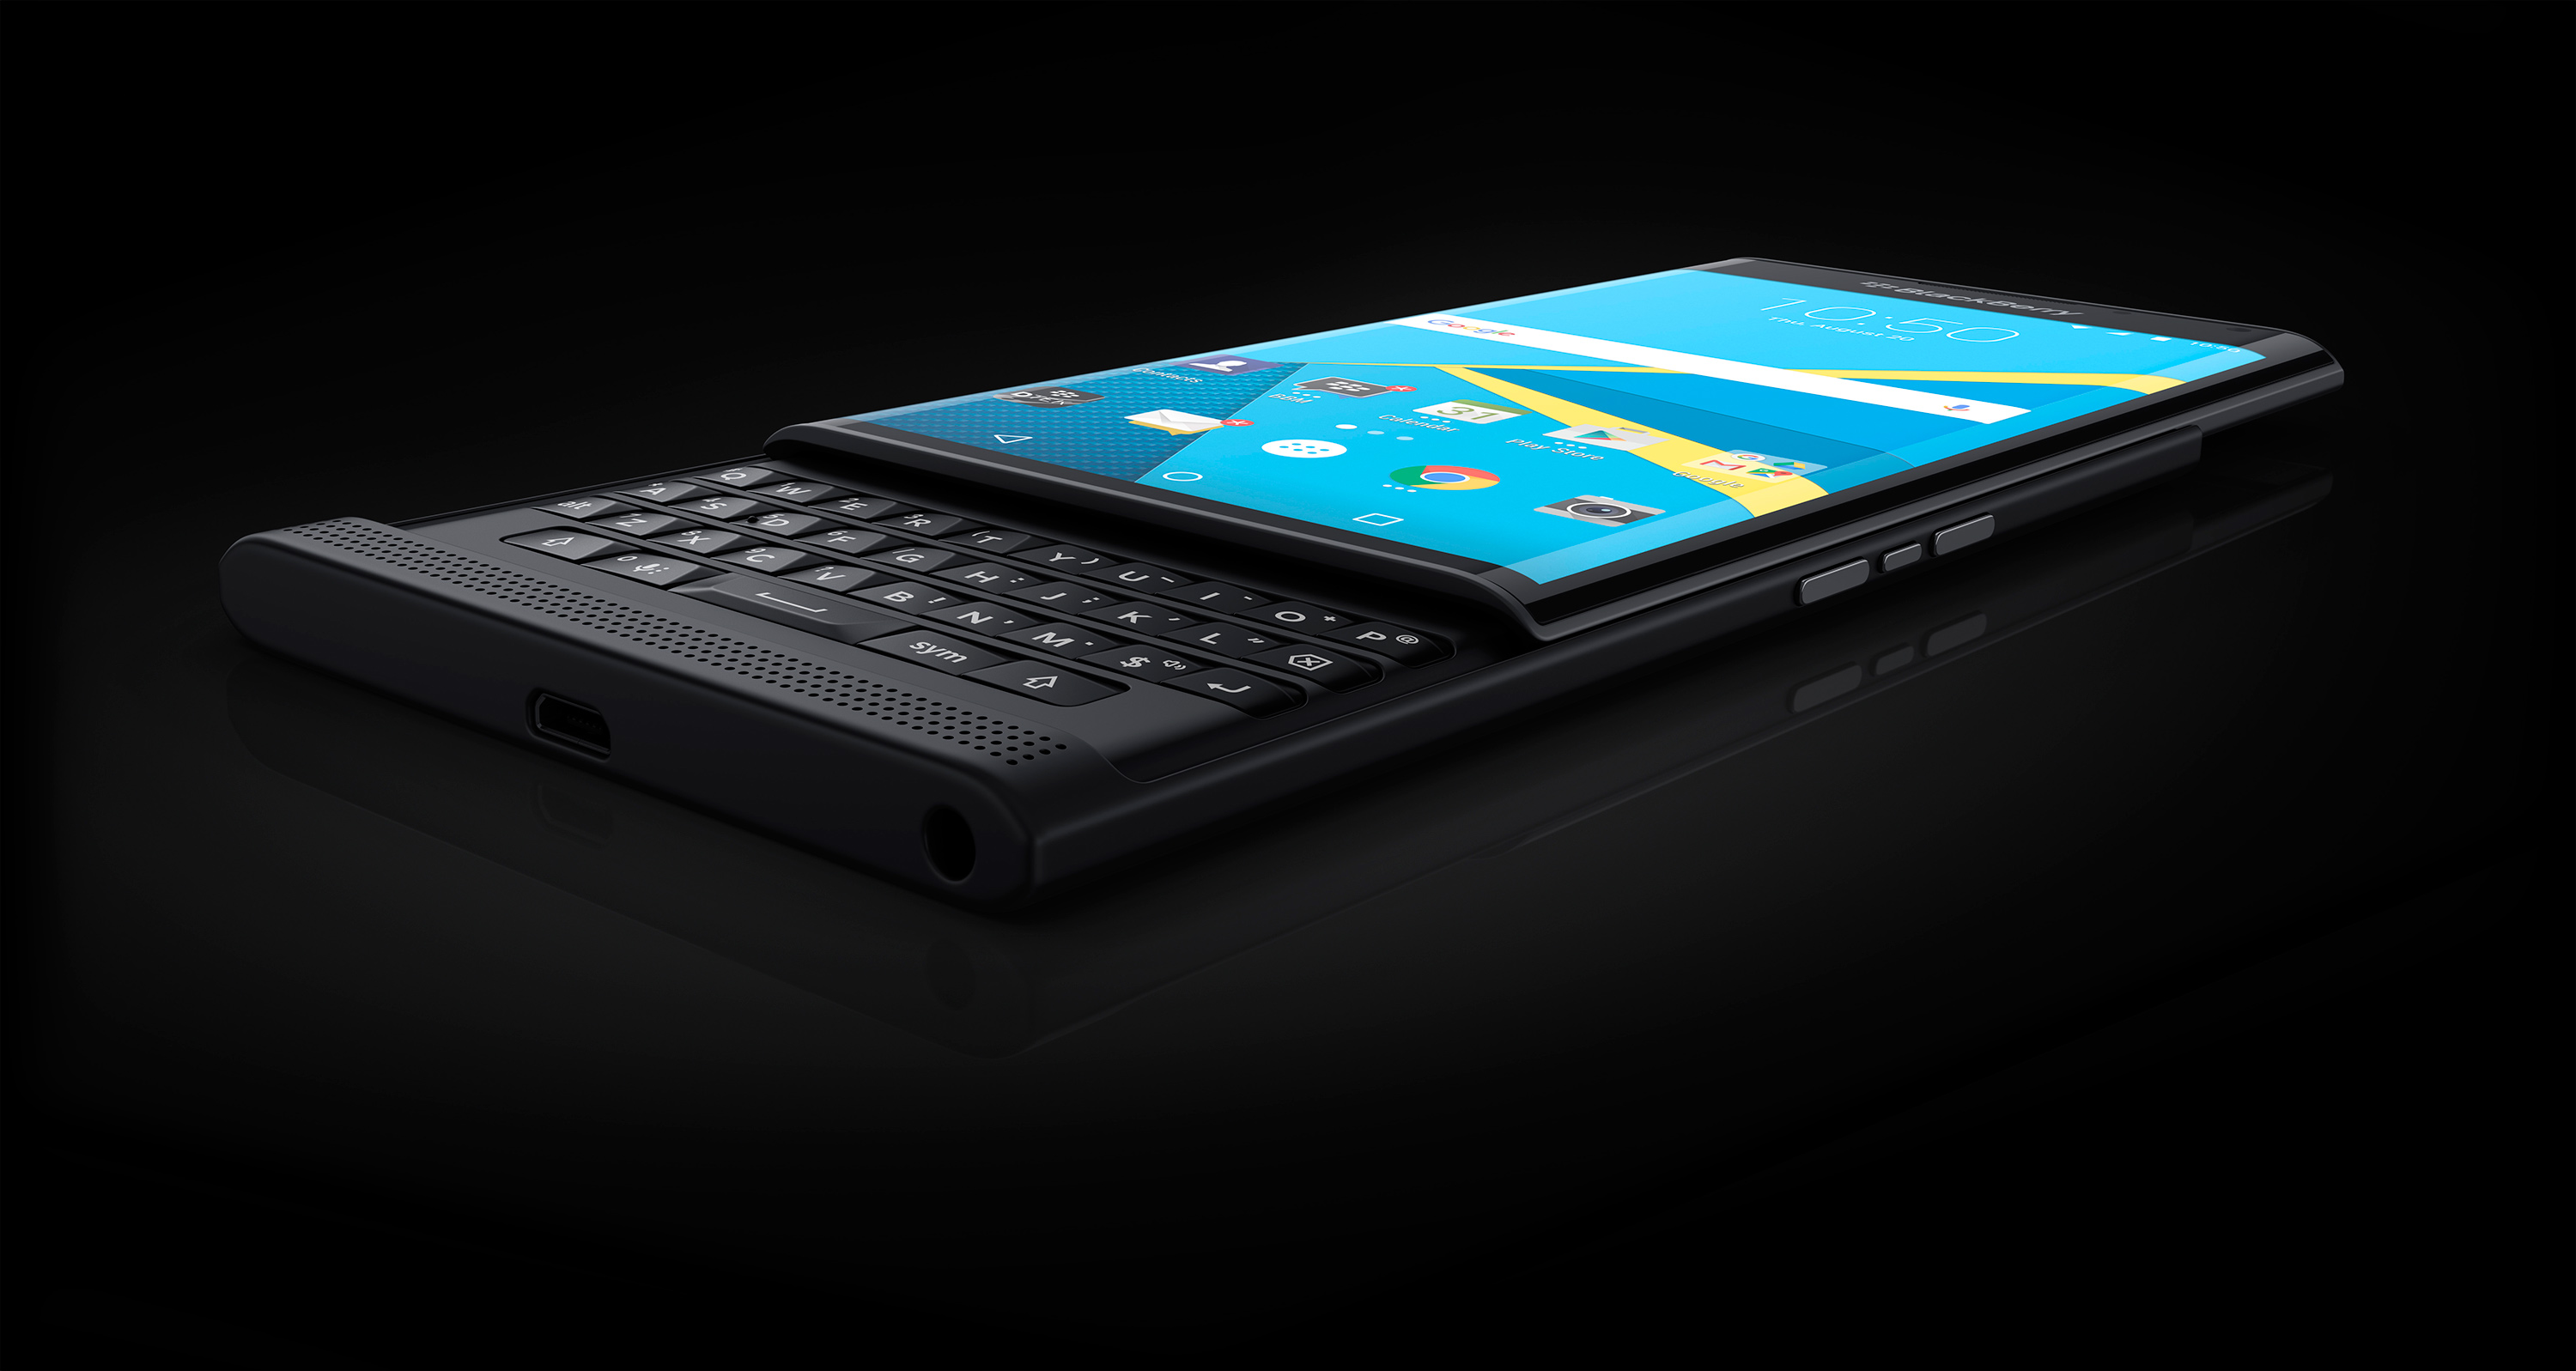 The QWERTY BlackBerry 5G smartphone might have one killer